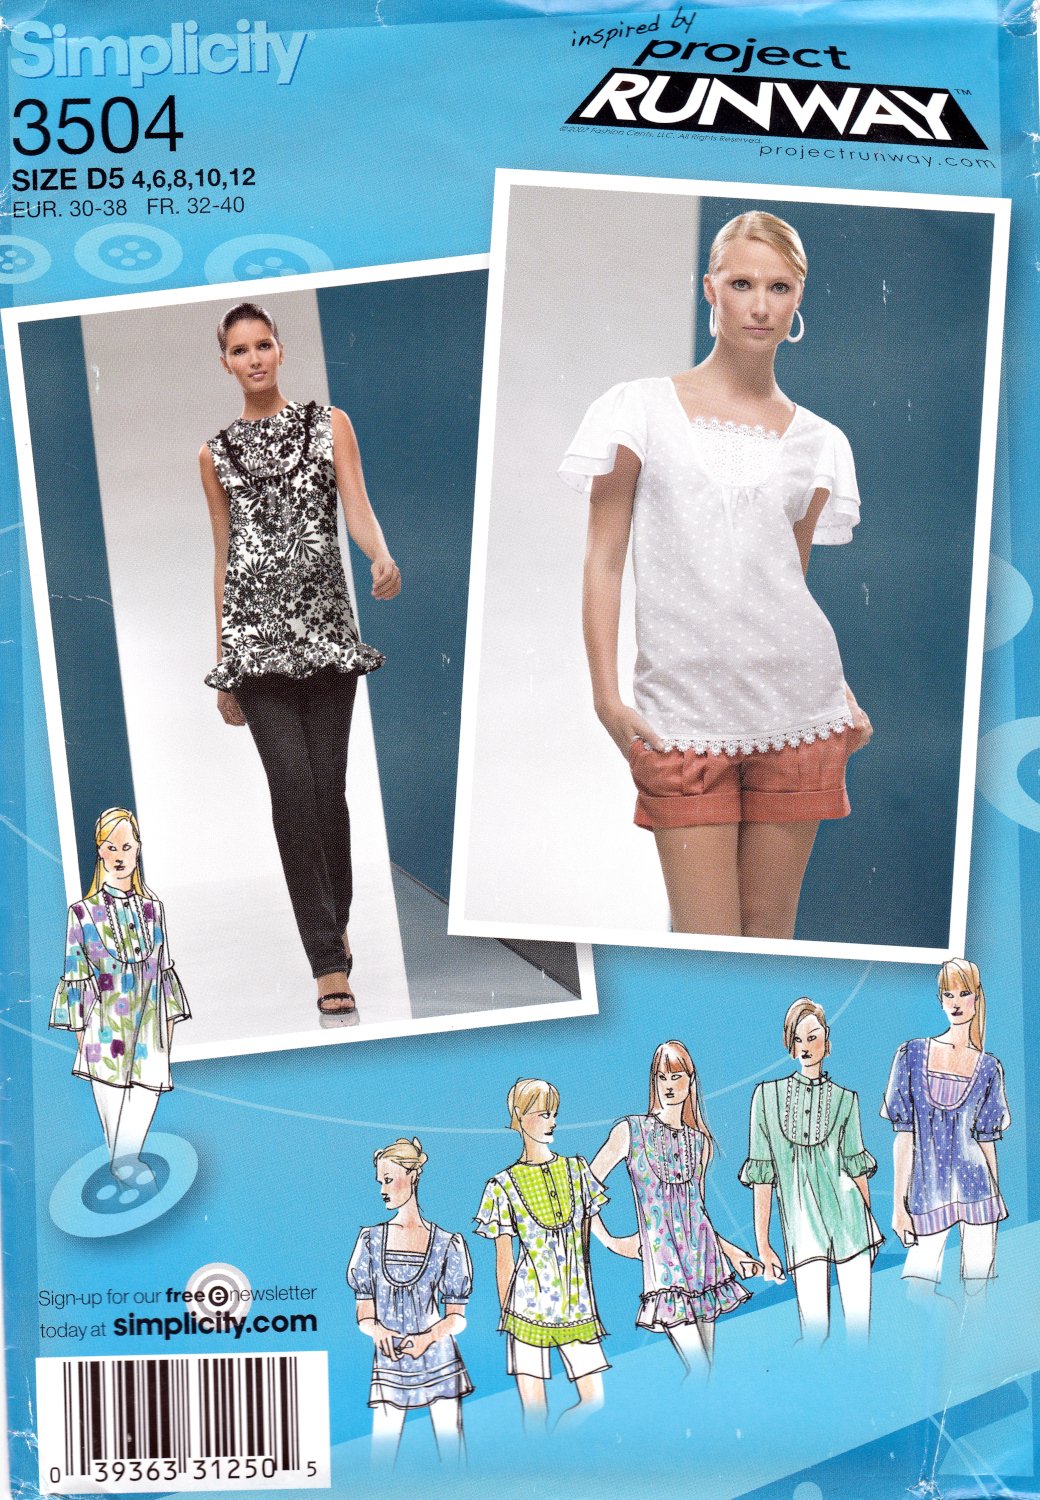 Simplicity 3504 Misses Tops Style Variations Project Runway Sewing Pattern sizes 4-6-8-10-12